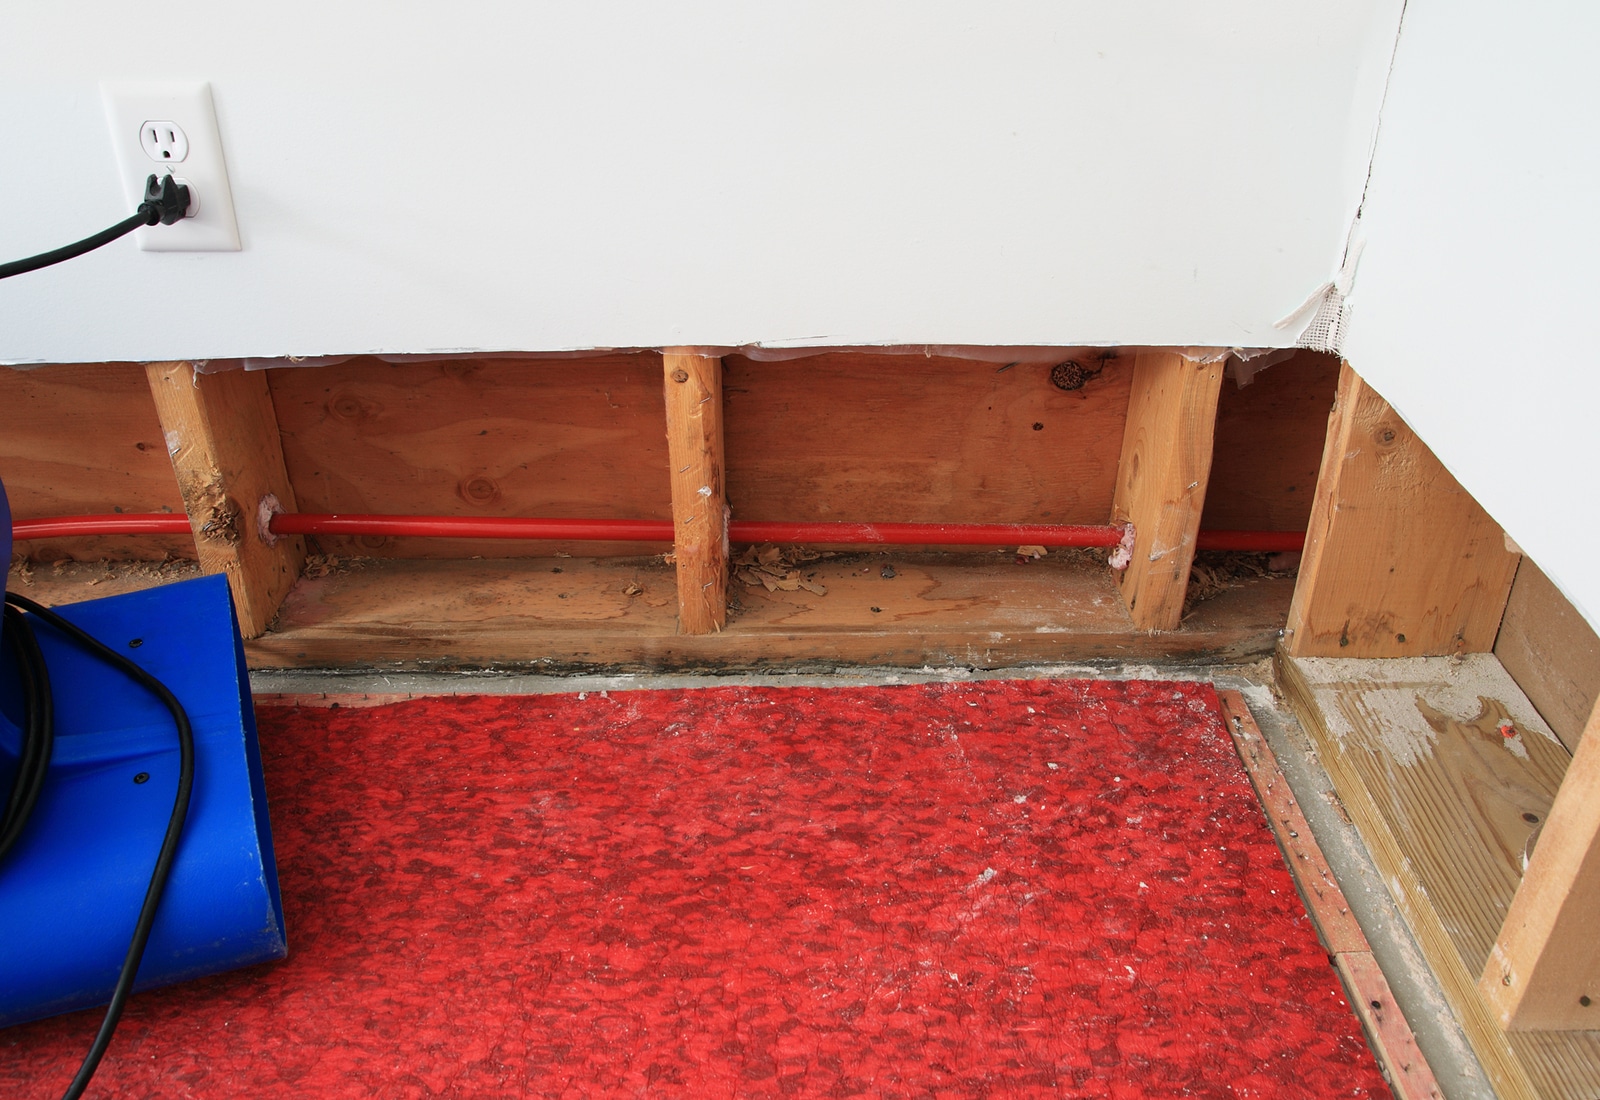 How to Address Flooding and Water Damage in the Home